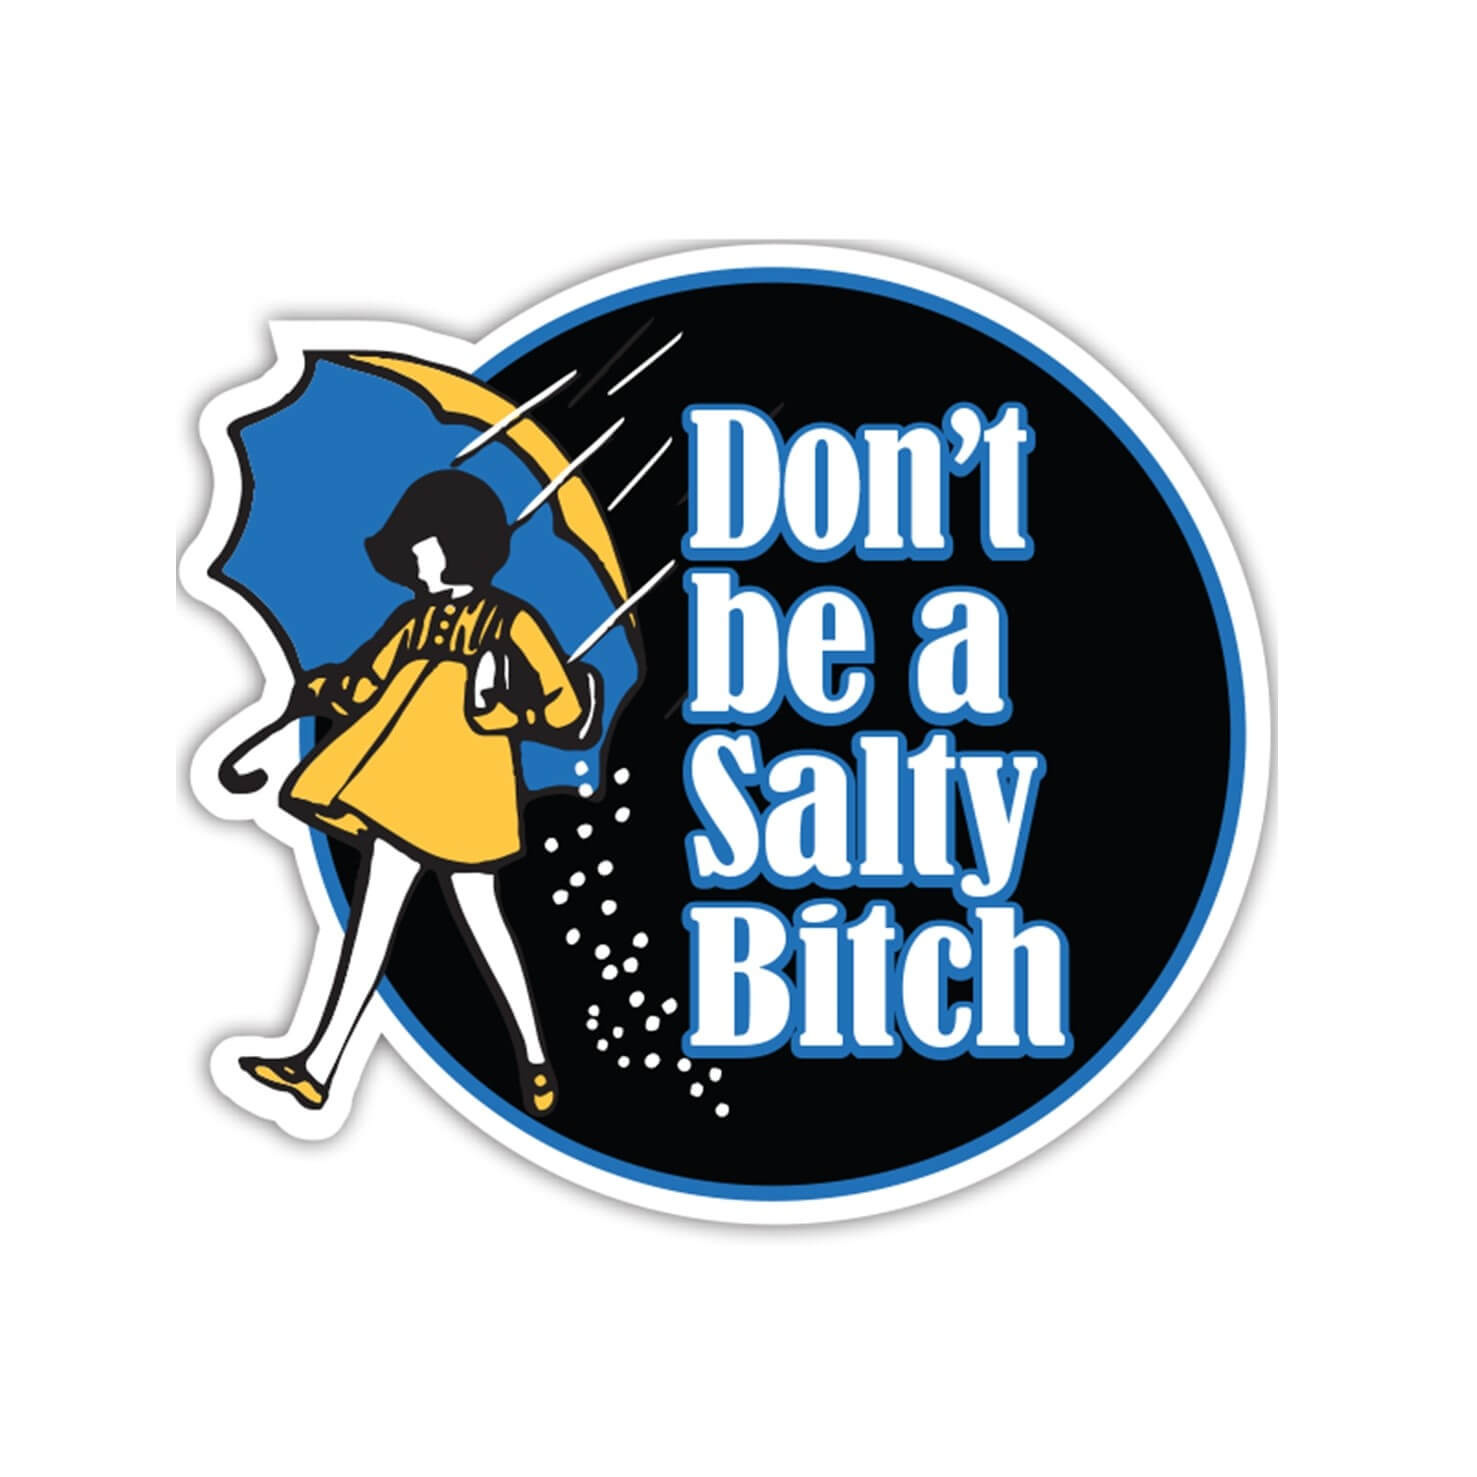 5ive Star Gear Don't Be Salty Morale Patch